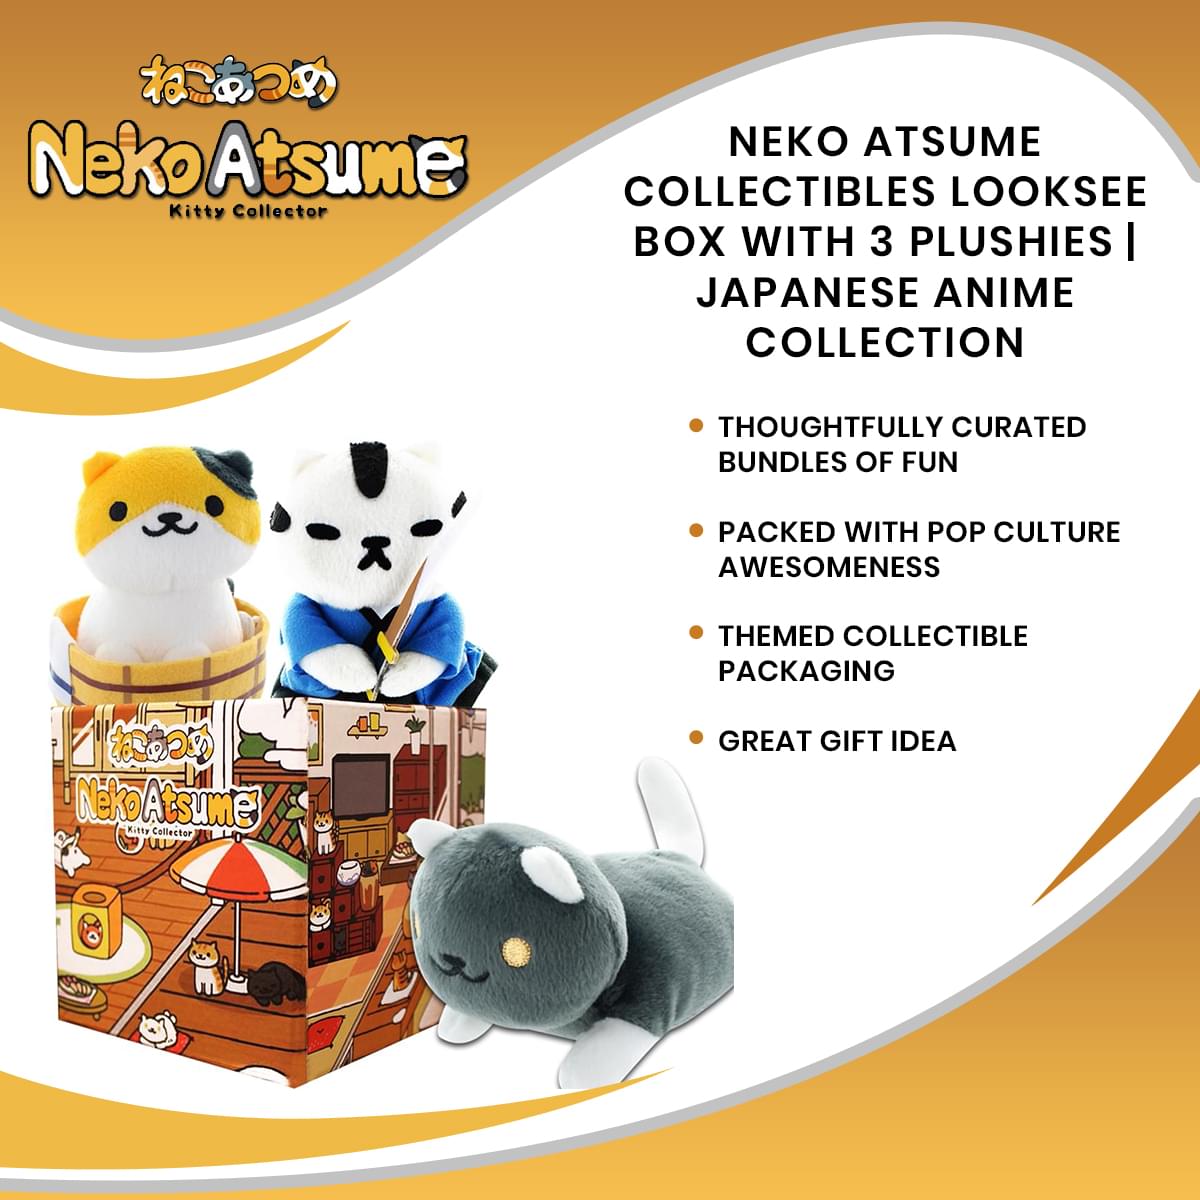 Neko Atsume Collectibles LookSee Box with 3 Plushies | Japanese Anime Collection